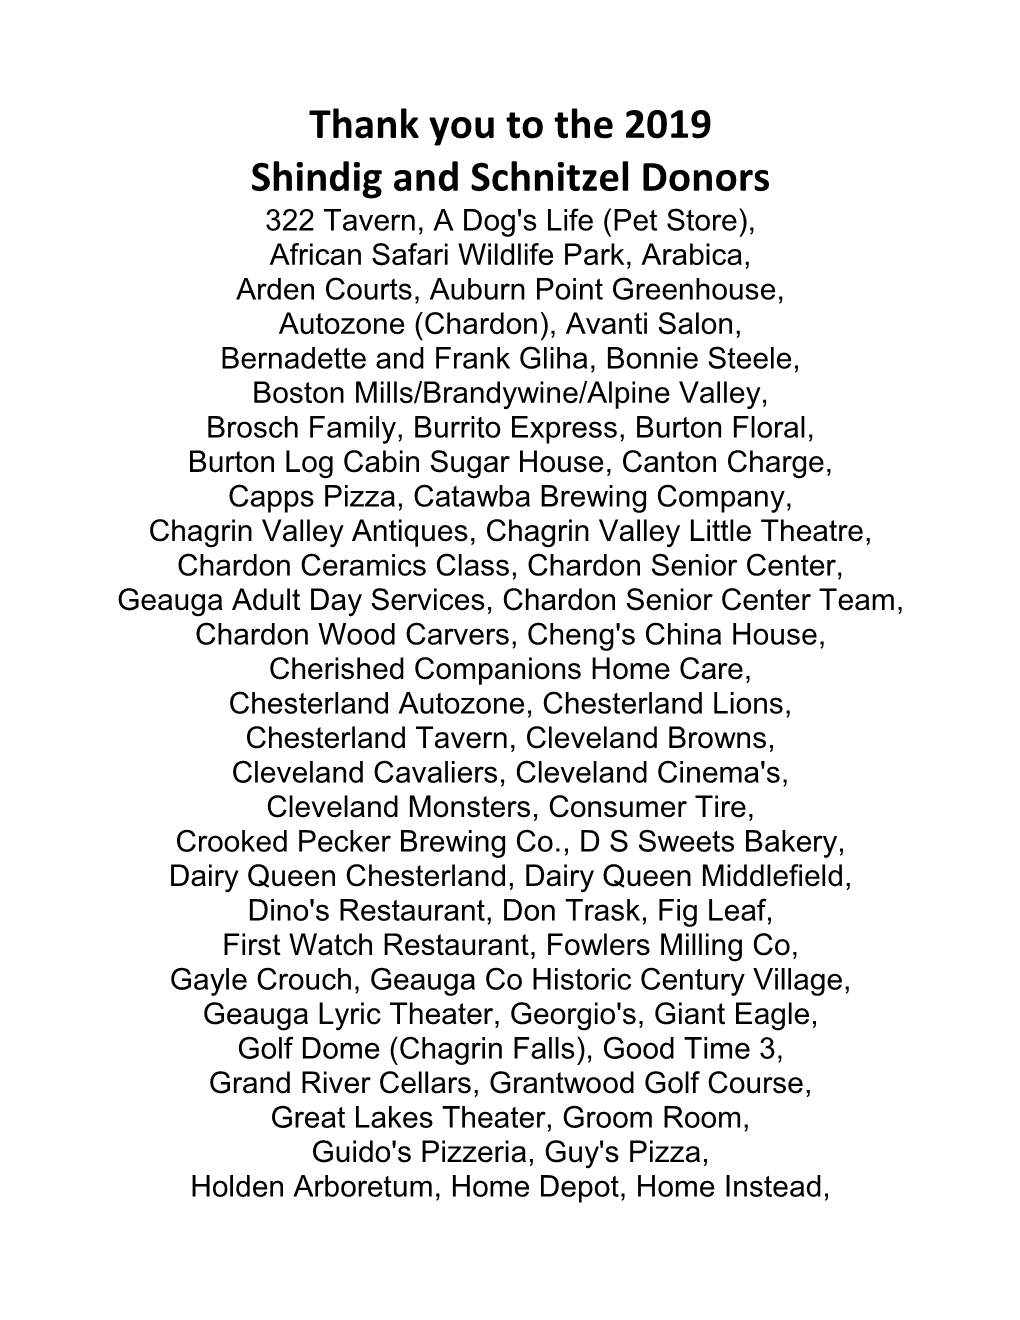 Thank You to the 2019 Shindig and Schnitzel Donors